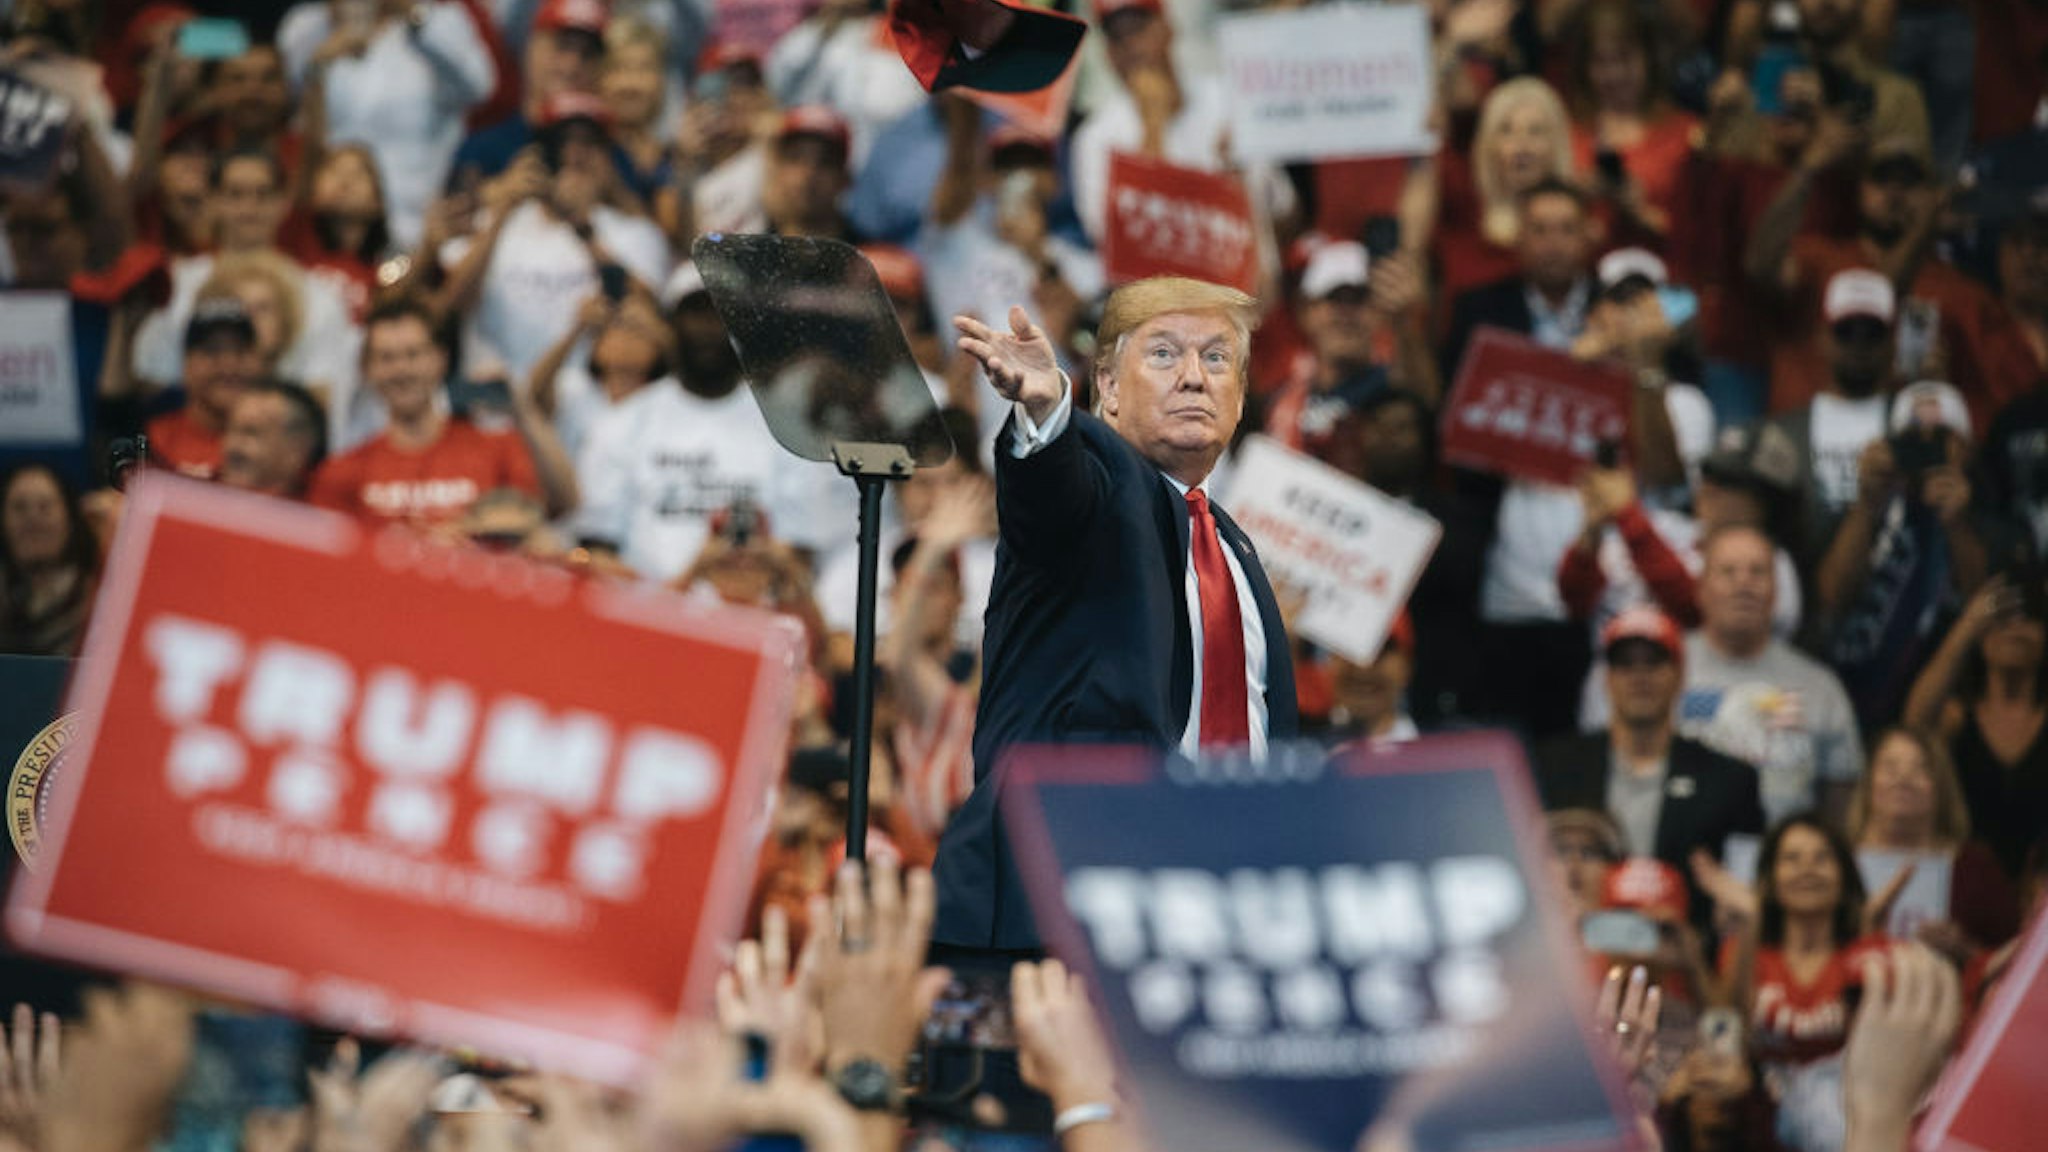 President Donald Trump throws a hat to the crowd during a 'Homecoming' rally in Sunrise, Florida, U.S., on Tuesday, Nov. 26, 2019. Monday, January 20, 2020, marks the third anniversary of U.S. President Donald Trump's inauguration.